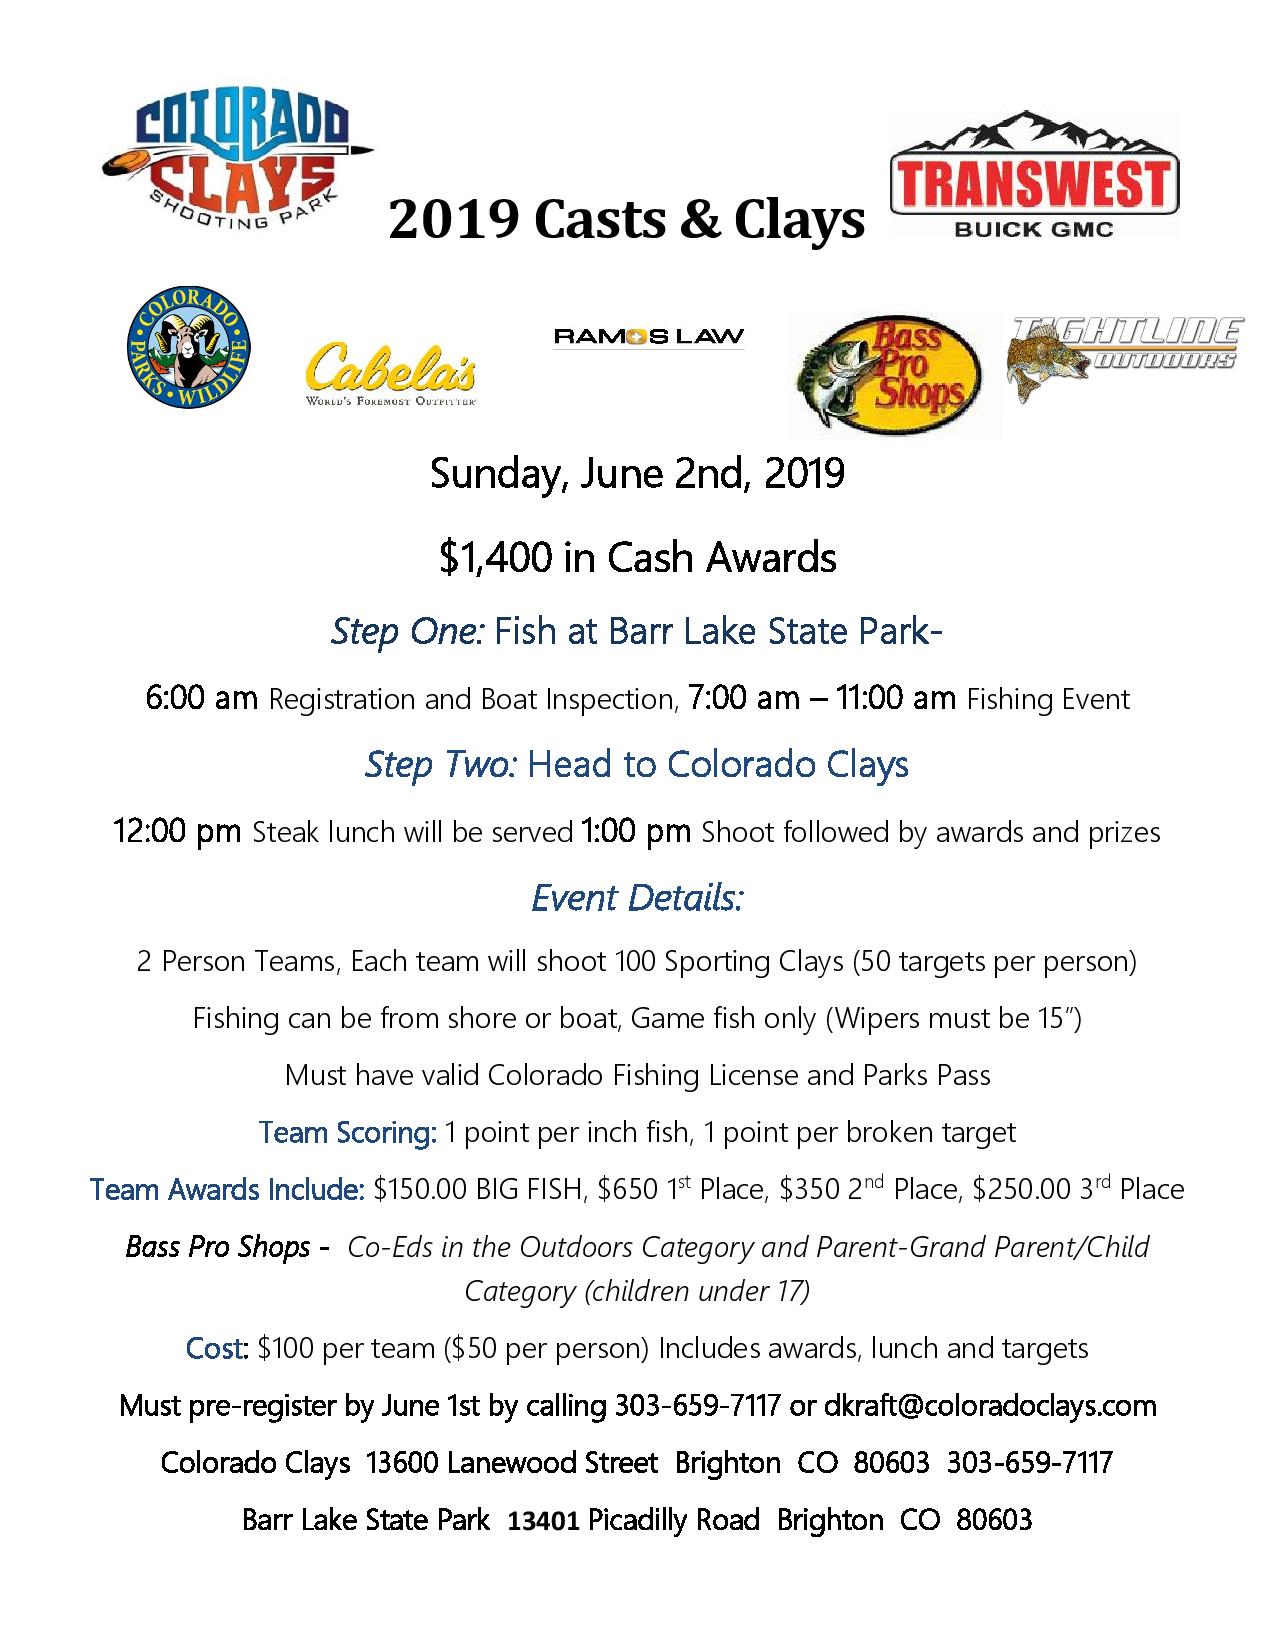 Casts & Clays Sponsored by Transwest Buick GMC